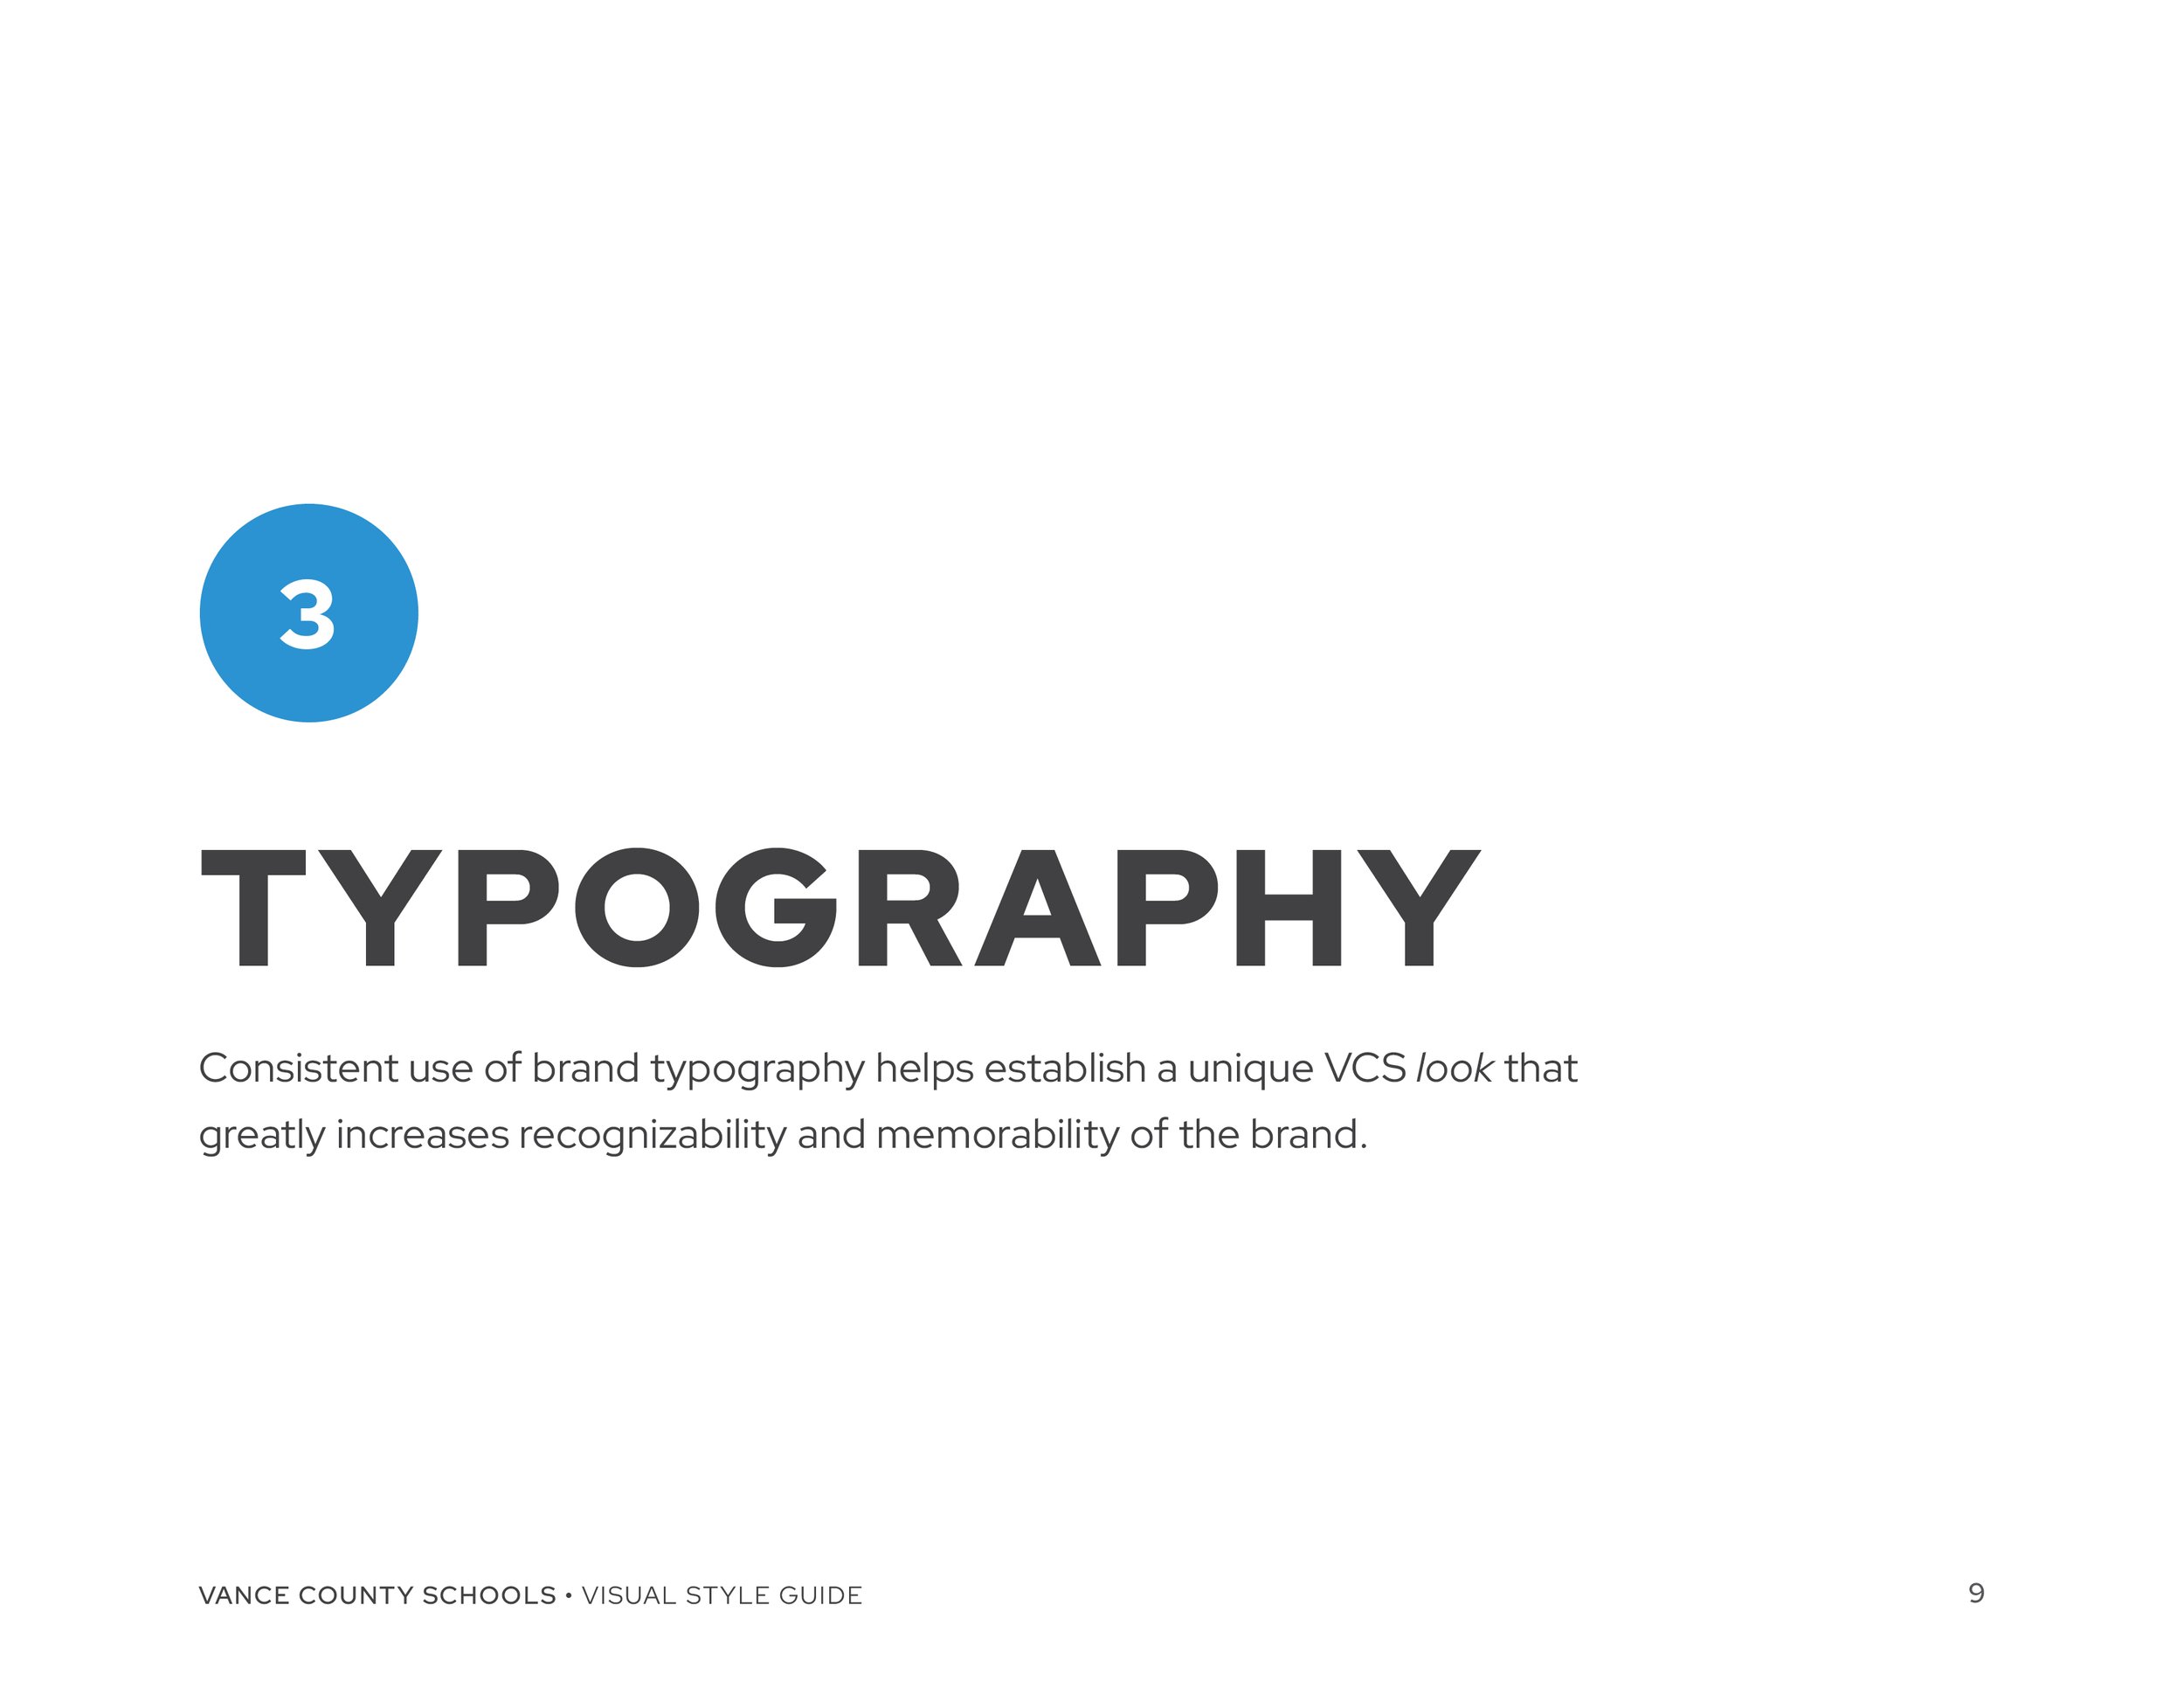 VCS Visual Style Guide9.jpg